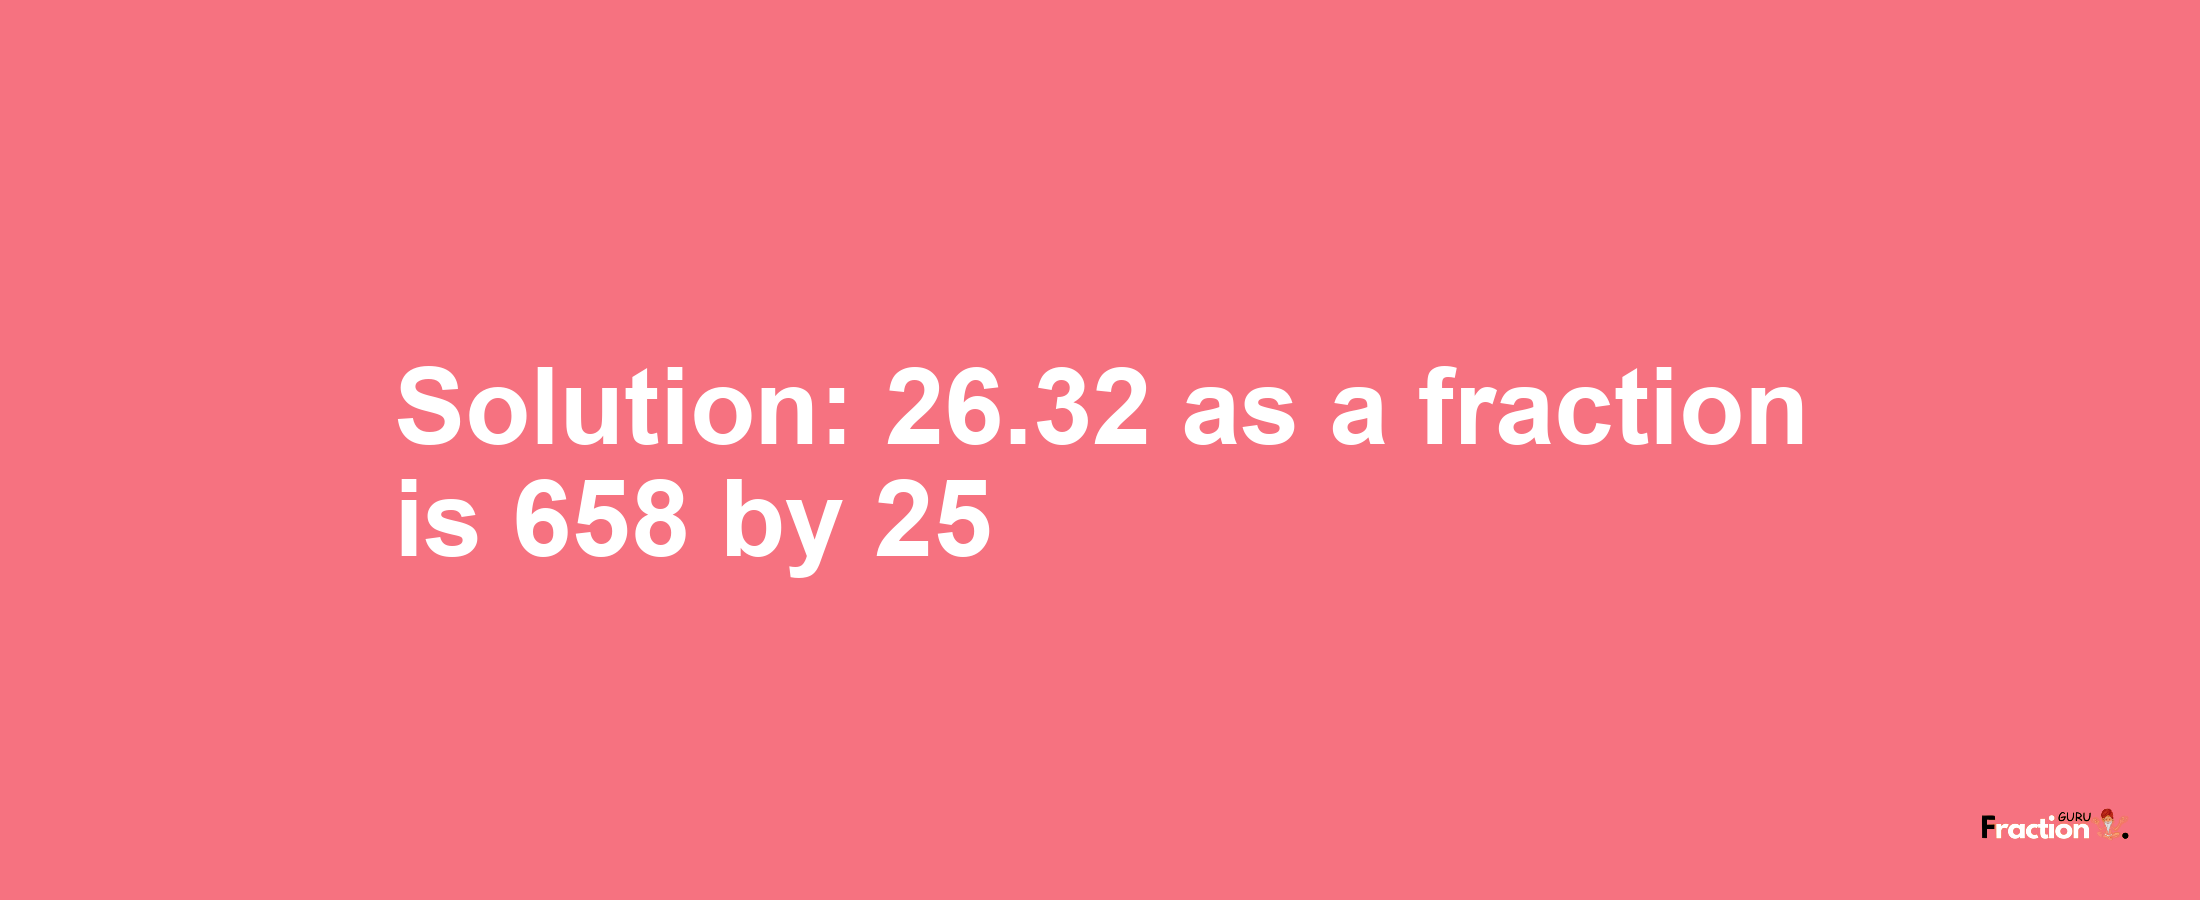 Solution:26.32 as a fraction is 658/25